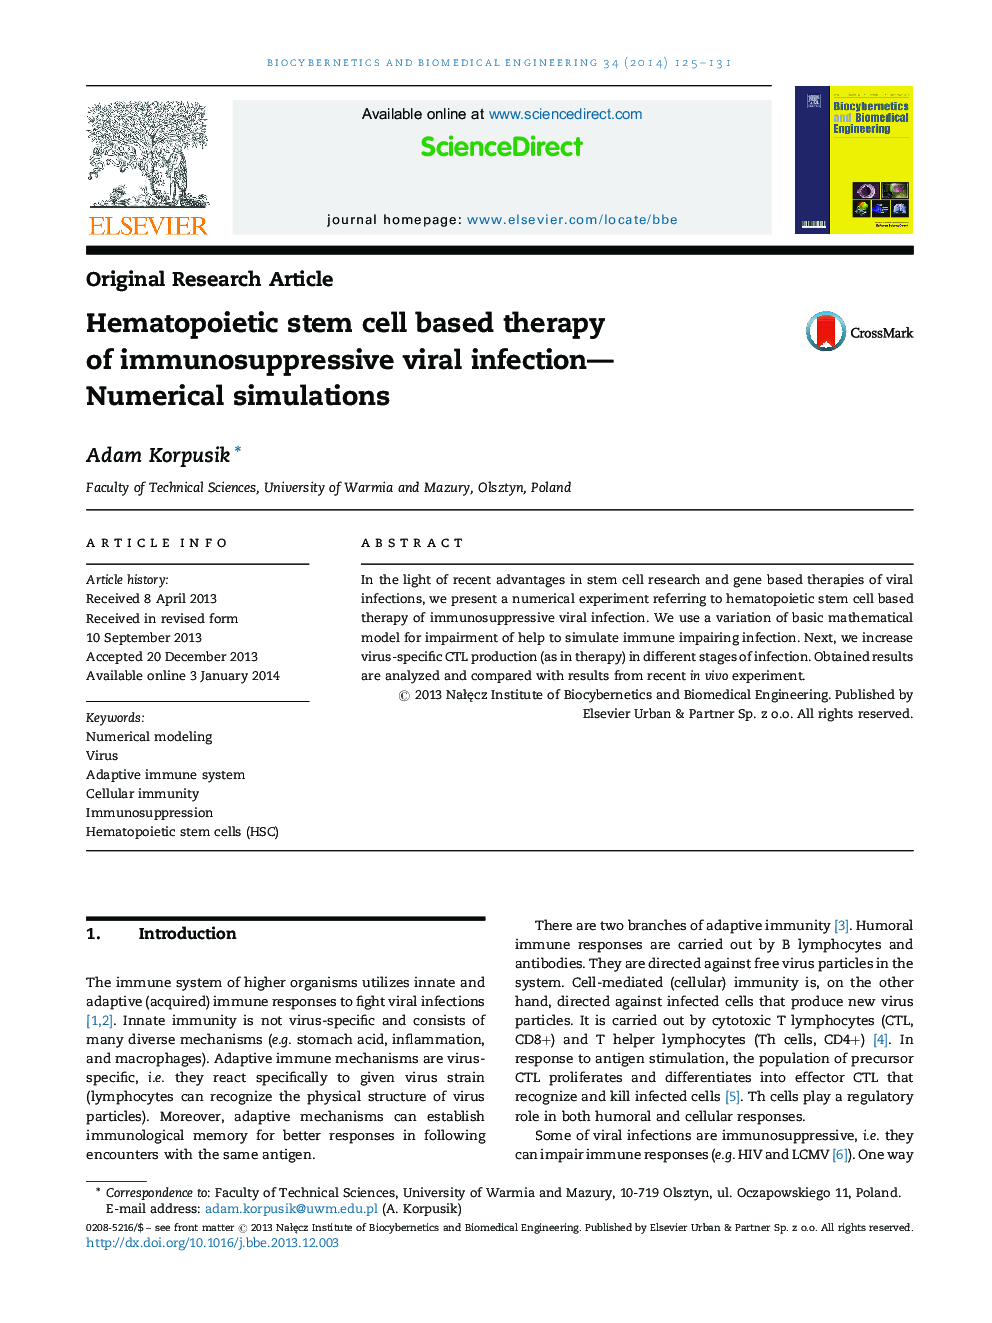 Hematopoietic stem cell based therapy of immunosuppressive viral infection—Numerical simulations